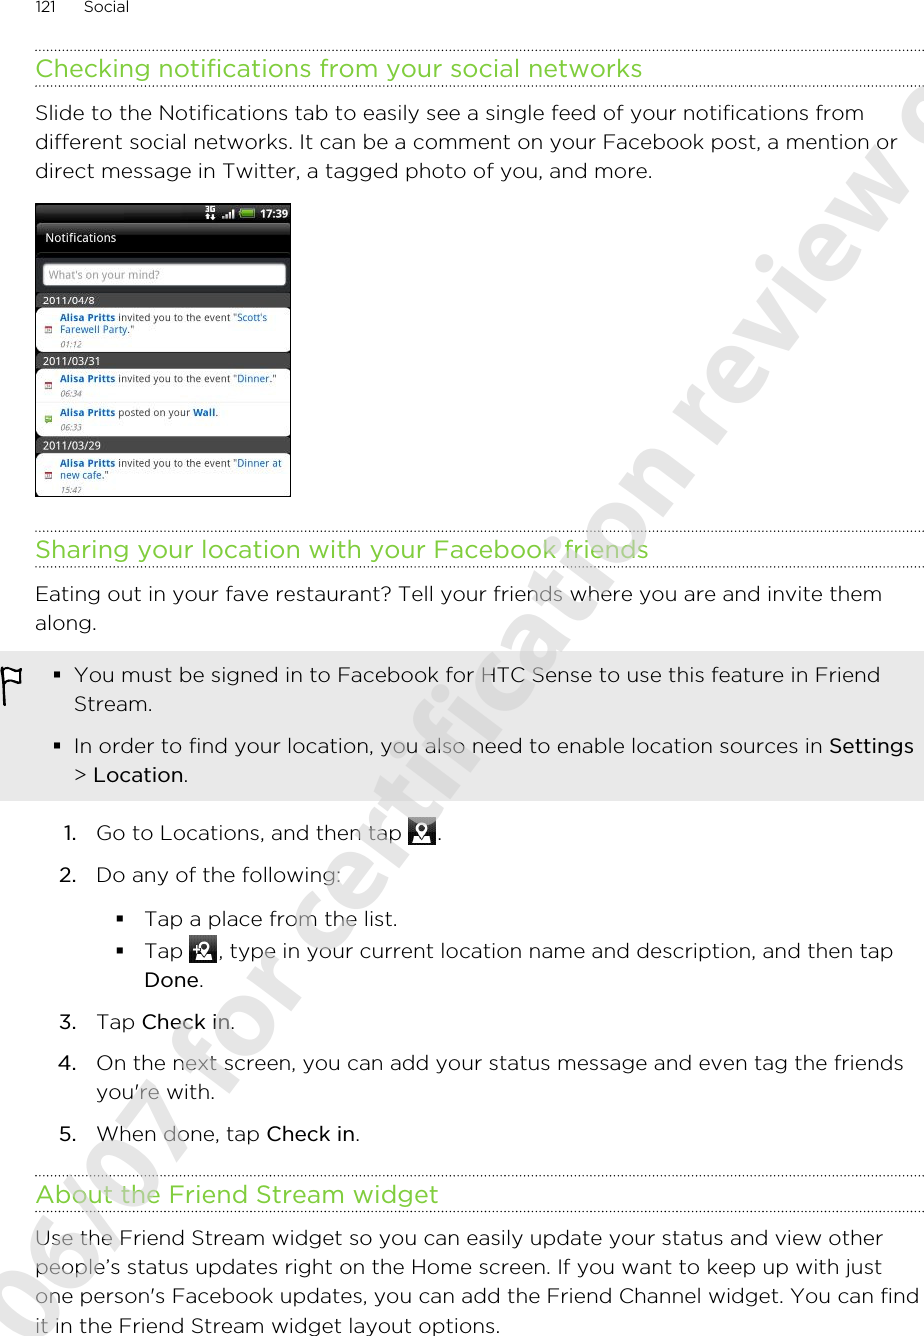 Checking notifications from your social networksSlide to the Notifications tab to easily see a single feed of your notifications fromdifferent social networks. It can be a comment on your Facebook post, a mention ordirect message in Twitter, a tagged photo of you, and more.Sharing your location with your Facebook friendsEating out in your fave restaurant? Tell your friends where you are and invite themalong.§You must be signed in to Facebook for HTC Sense to use this feature in FriendStream.§In order to find your location, you also need to enable location sources in Settings&gt; Location.1. Go to Locations, and then tap  .2. Do any of the following:§Tap a place from the list.§Tap  , type in your current location name and description, and then tapDone.3. Tap Check in.4. On the next screen, you can add your status message and even tag the friendsyou&apos;re with.5. When done, tap Check in.About the Friend Stream widgetUse the Friend Stream widget so you can easily update your status and view otherpeople’s status updates right on the Home screen. If you want to keep up with justone person&apos;s Facebook updates, you can add the Friend Channel widget. You can findit in the Friend Stream widget layout options.121 Social2011/06/07 for certification review only